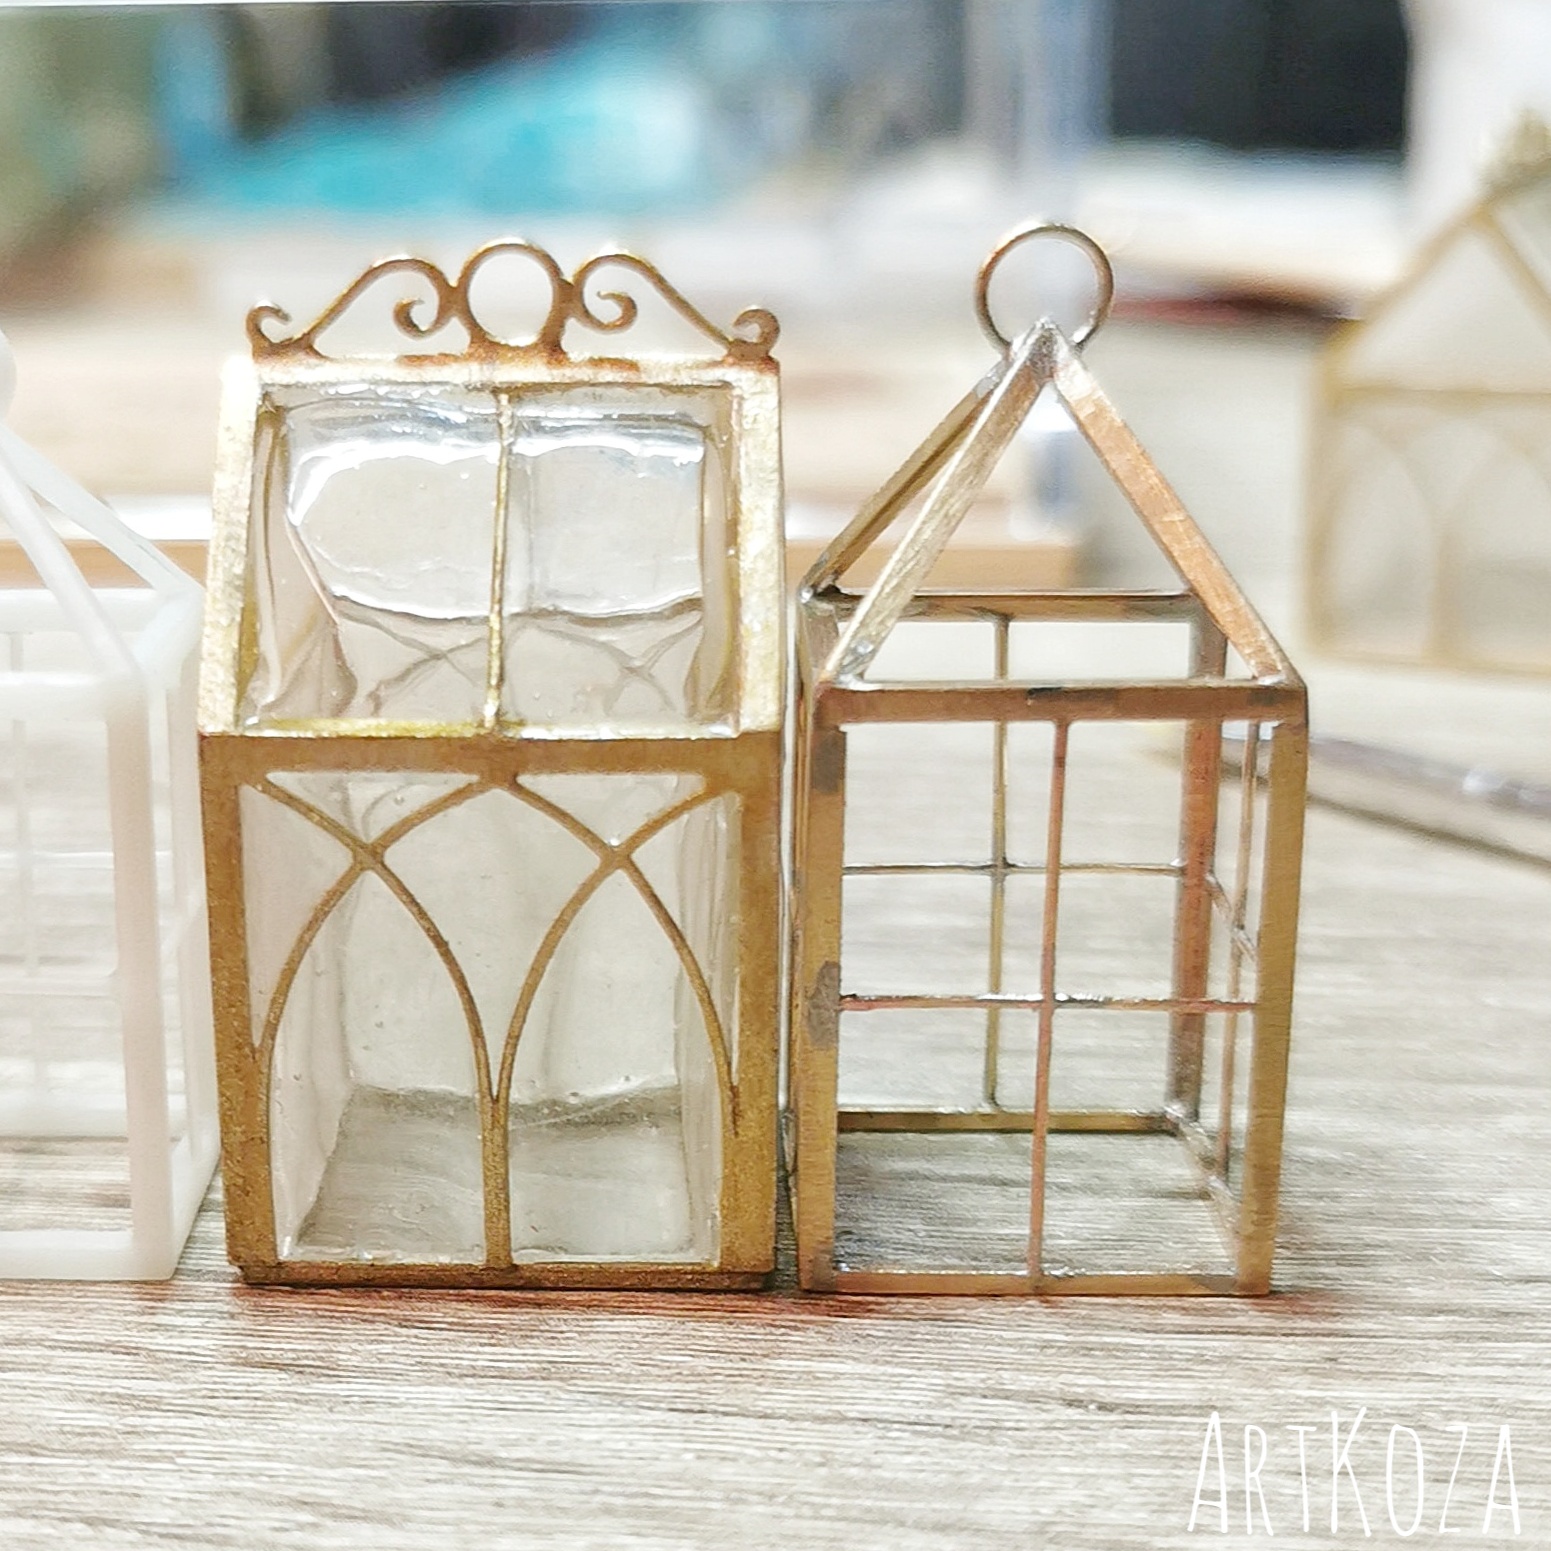 Classic small brass greenhouse - without windows